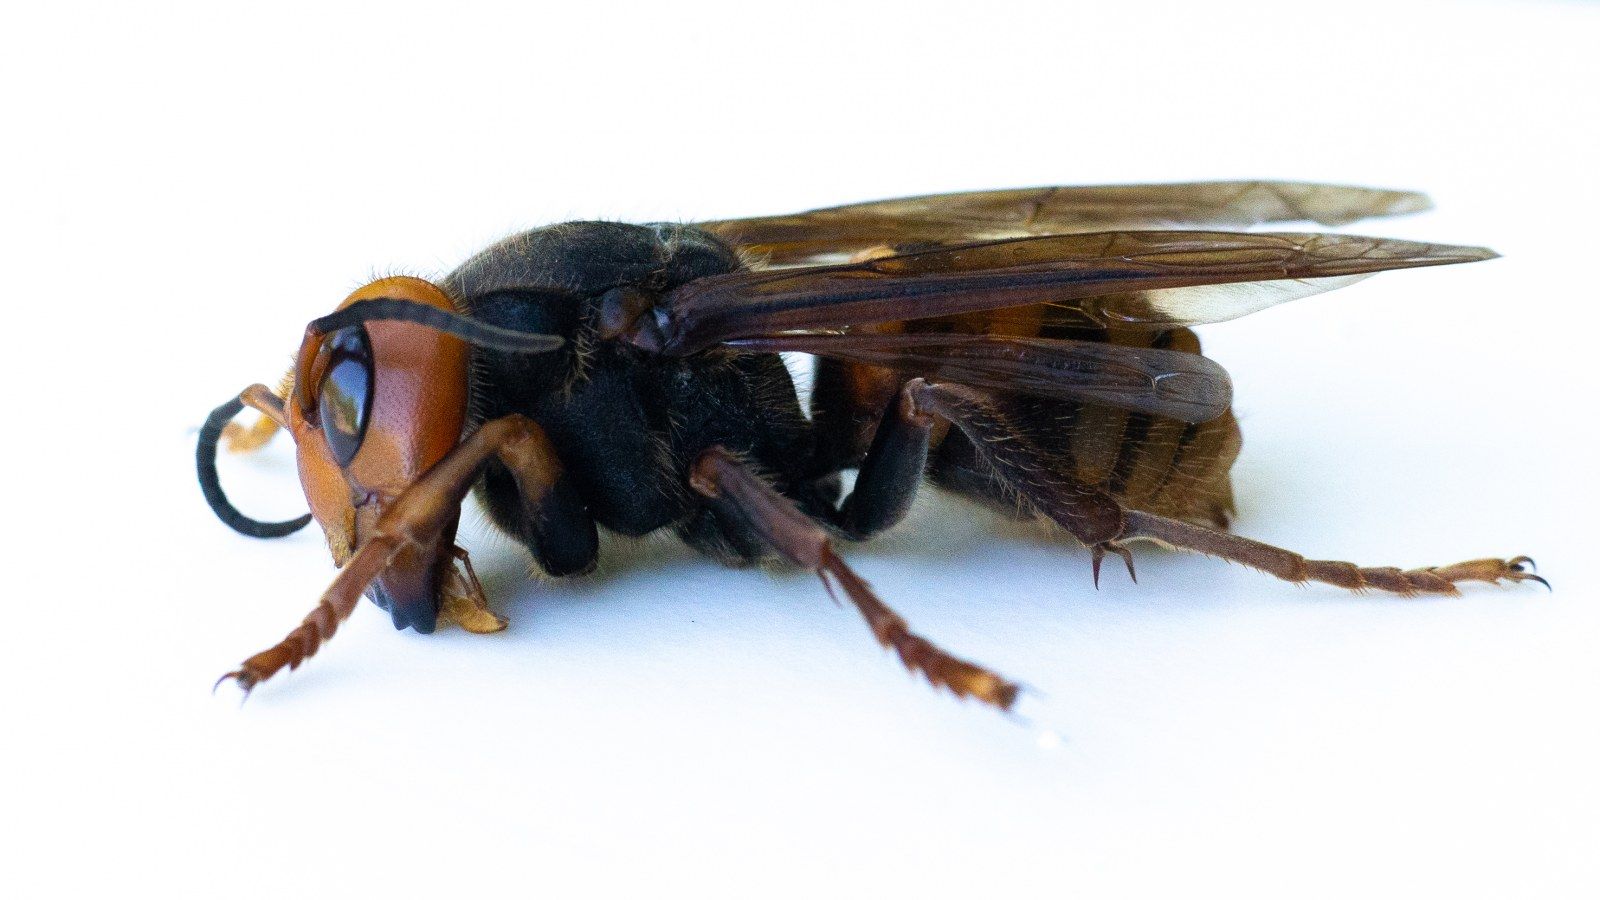 Murder Hornet or Cicada Killer? Here's What to Look for to Stay Safe